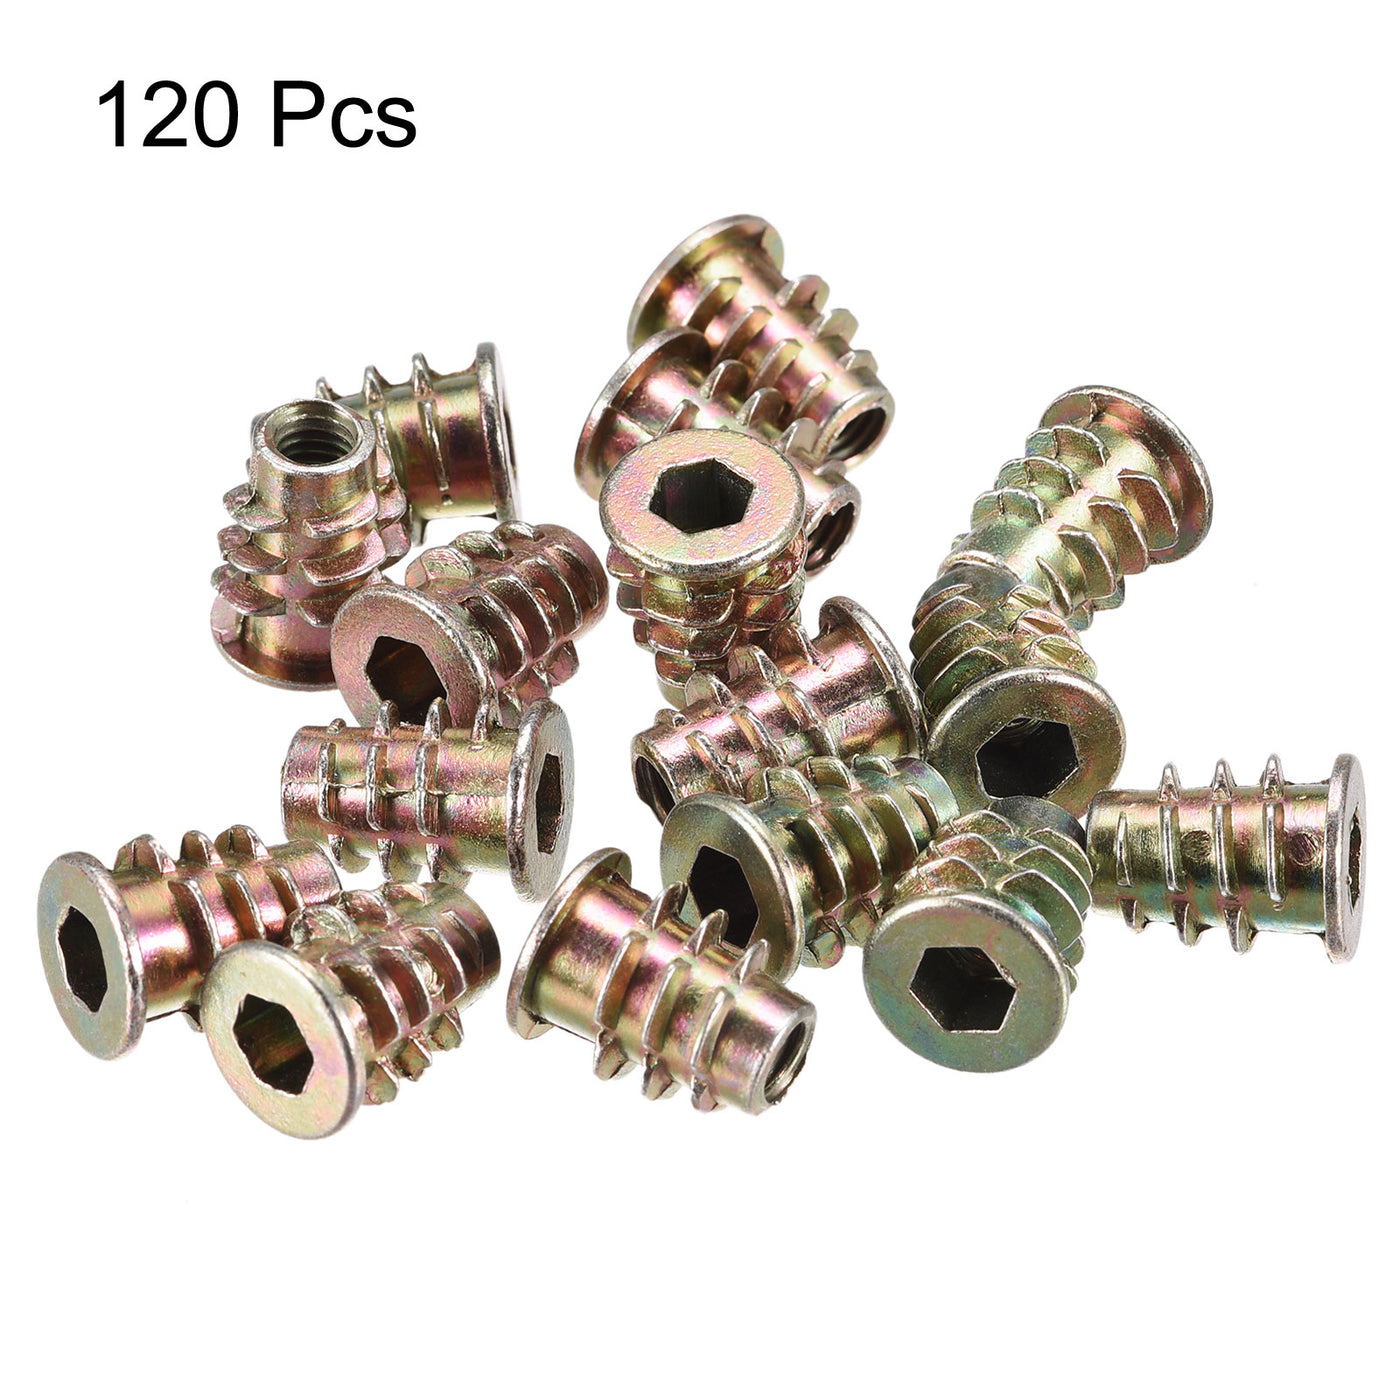 uxcell Uxcell Furniture Screw-in Nut, Zinc Alloy Threaded Insert Nuts Hardware Nuts